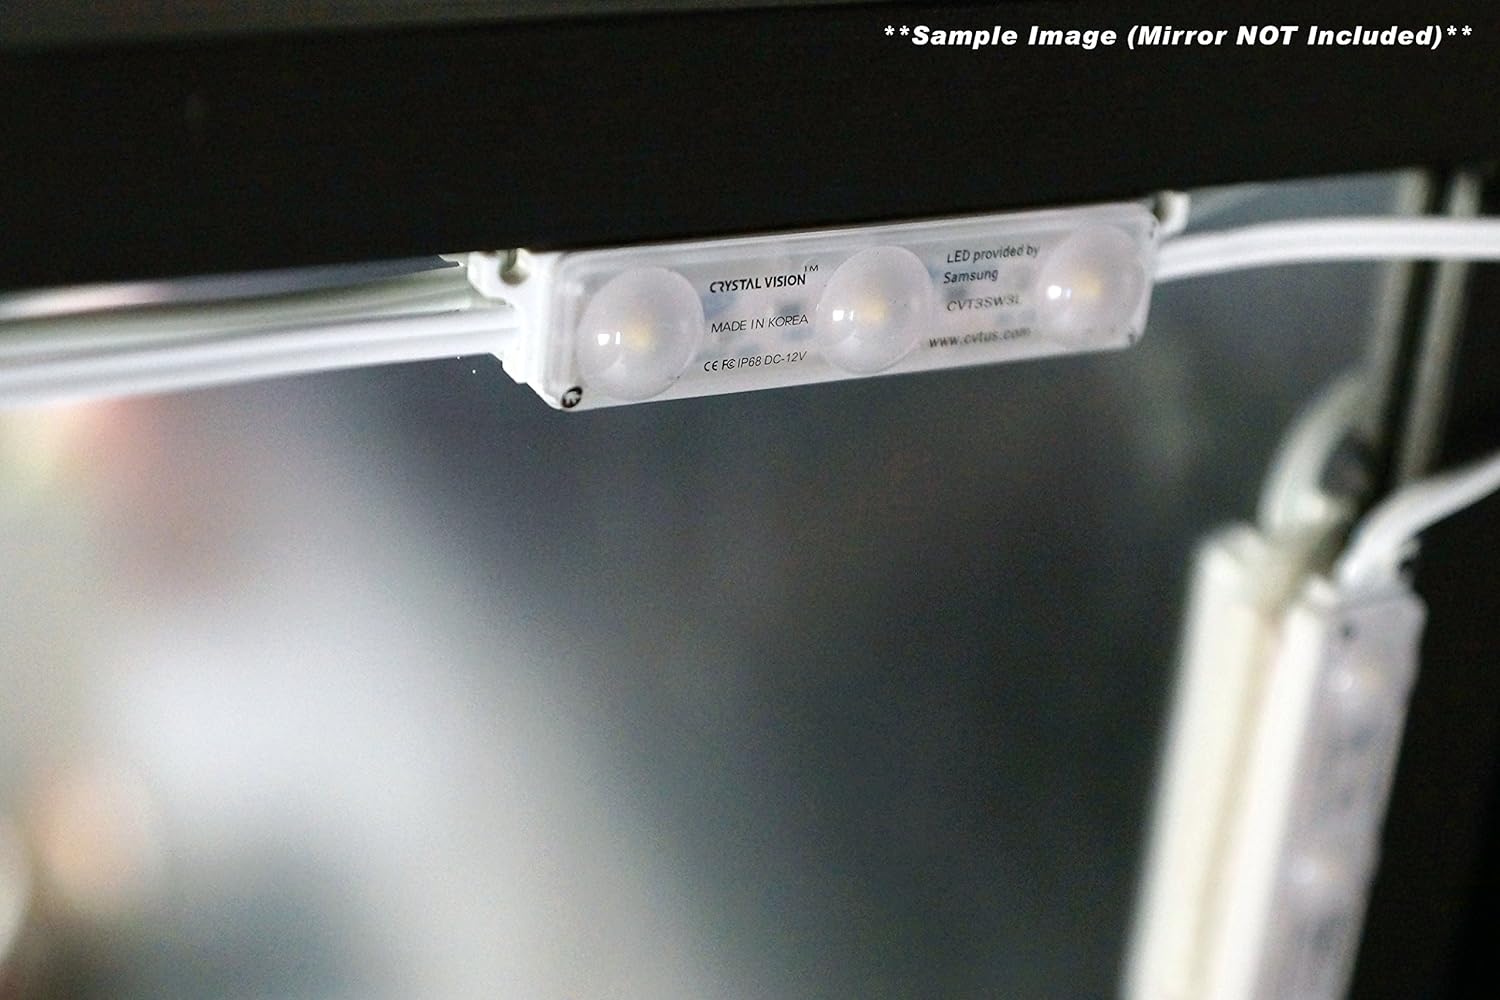 The image shows a close-up of Crystal Vision's LED module, provided by SAMSUNG and made in Korea. The module is attached to the underside of a surface, possibly a mirror frame, indicating it's designed for discreet installation. A note clarifies that this is a sample image and the mirror is not included. The focus is on the LED module's design and branding details.